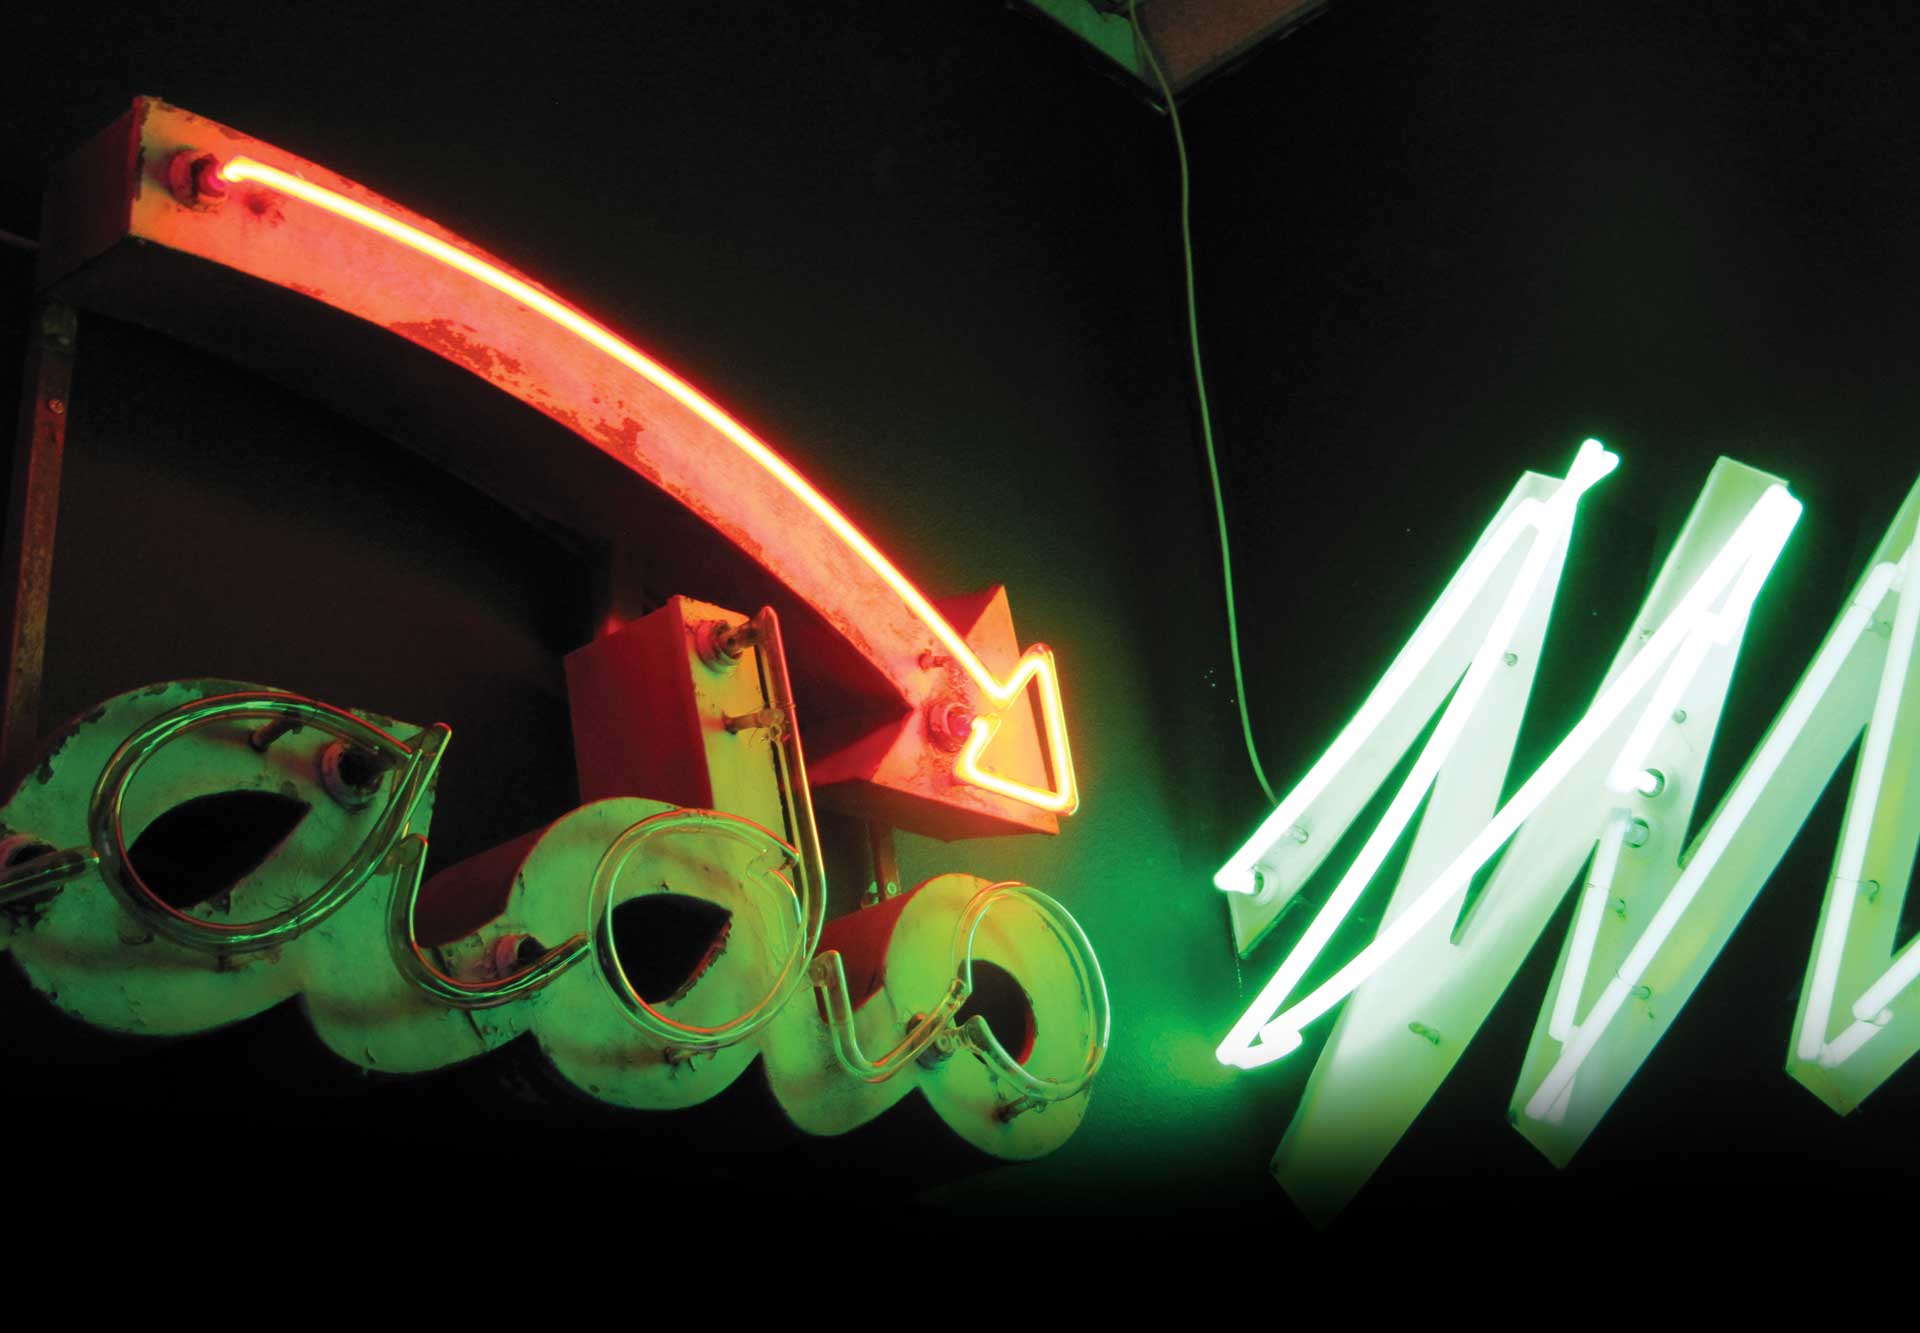 Details of an old neon